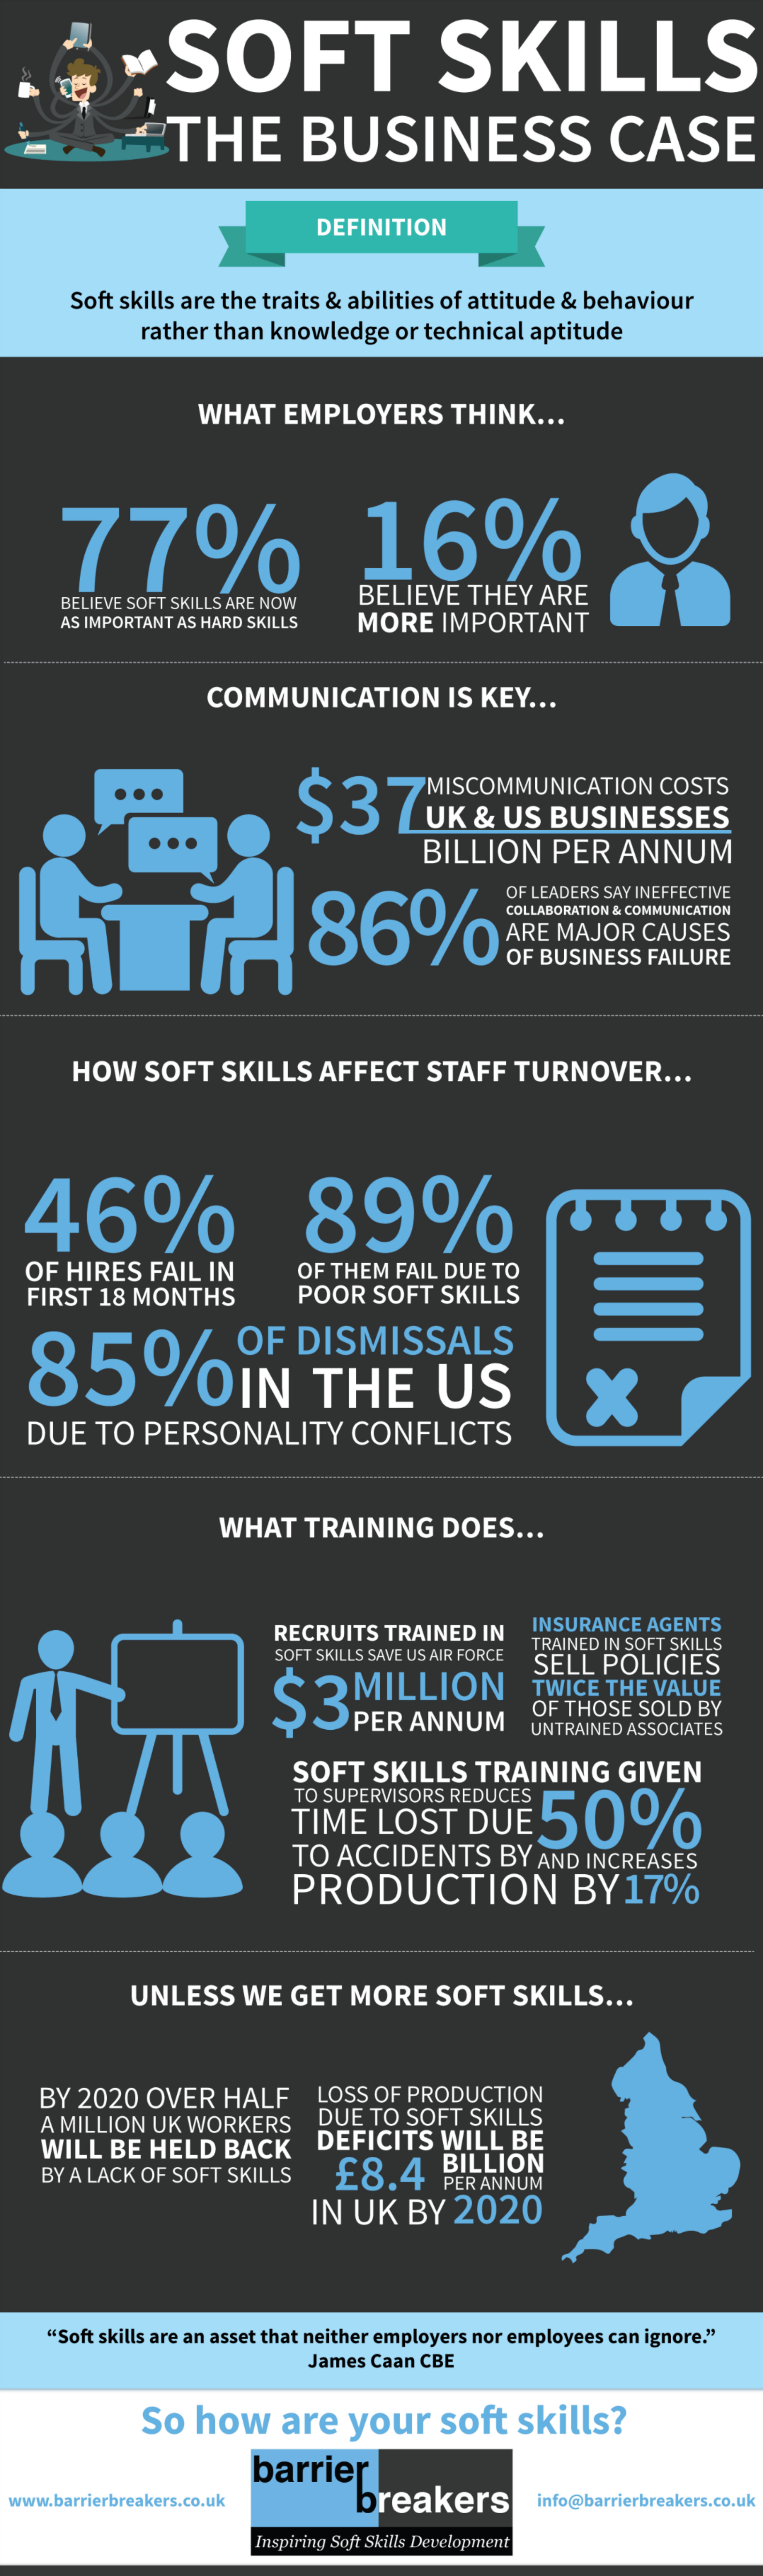 Soft Skills - the business case